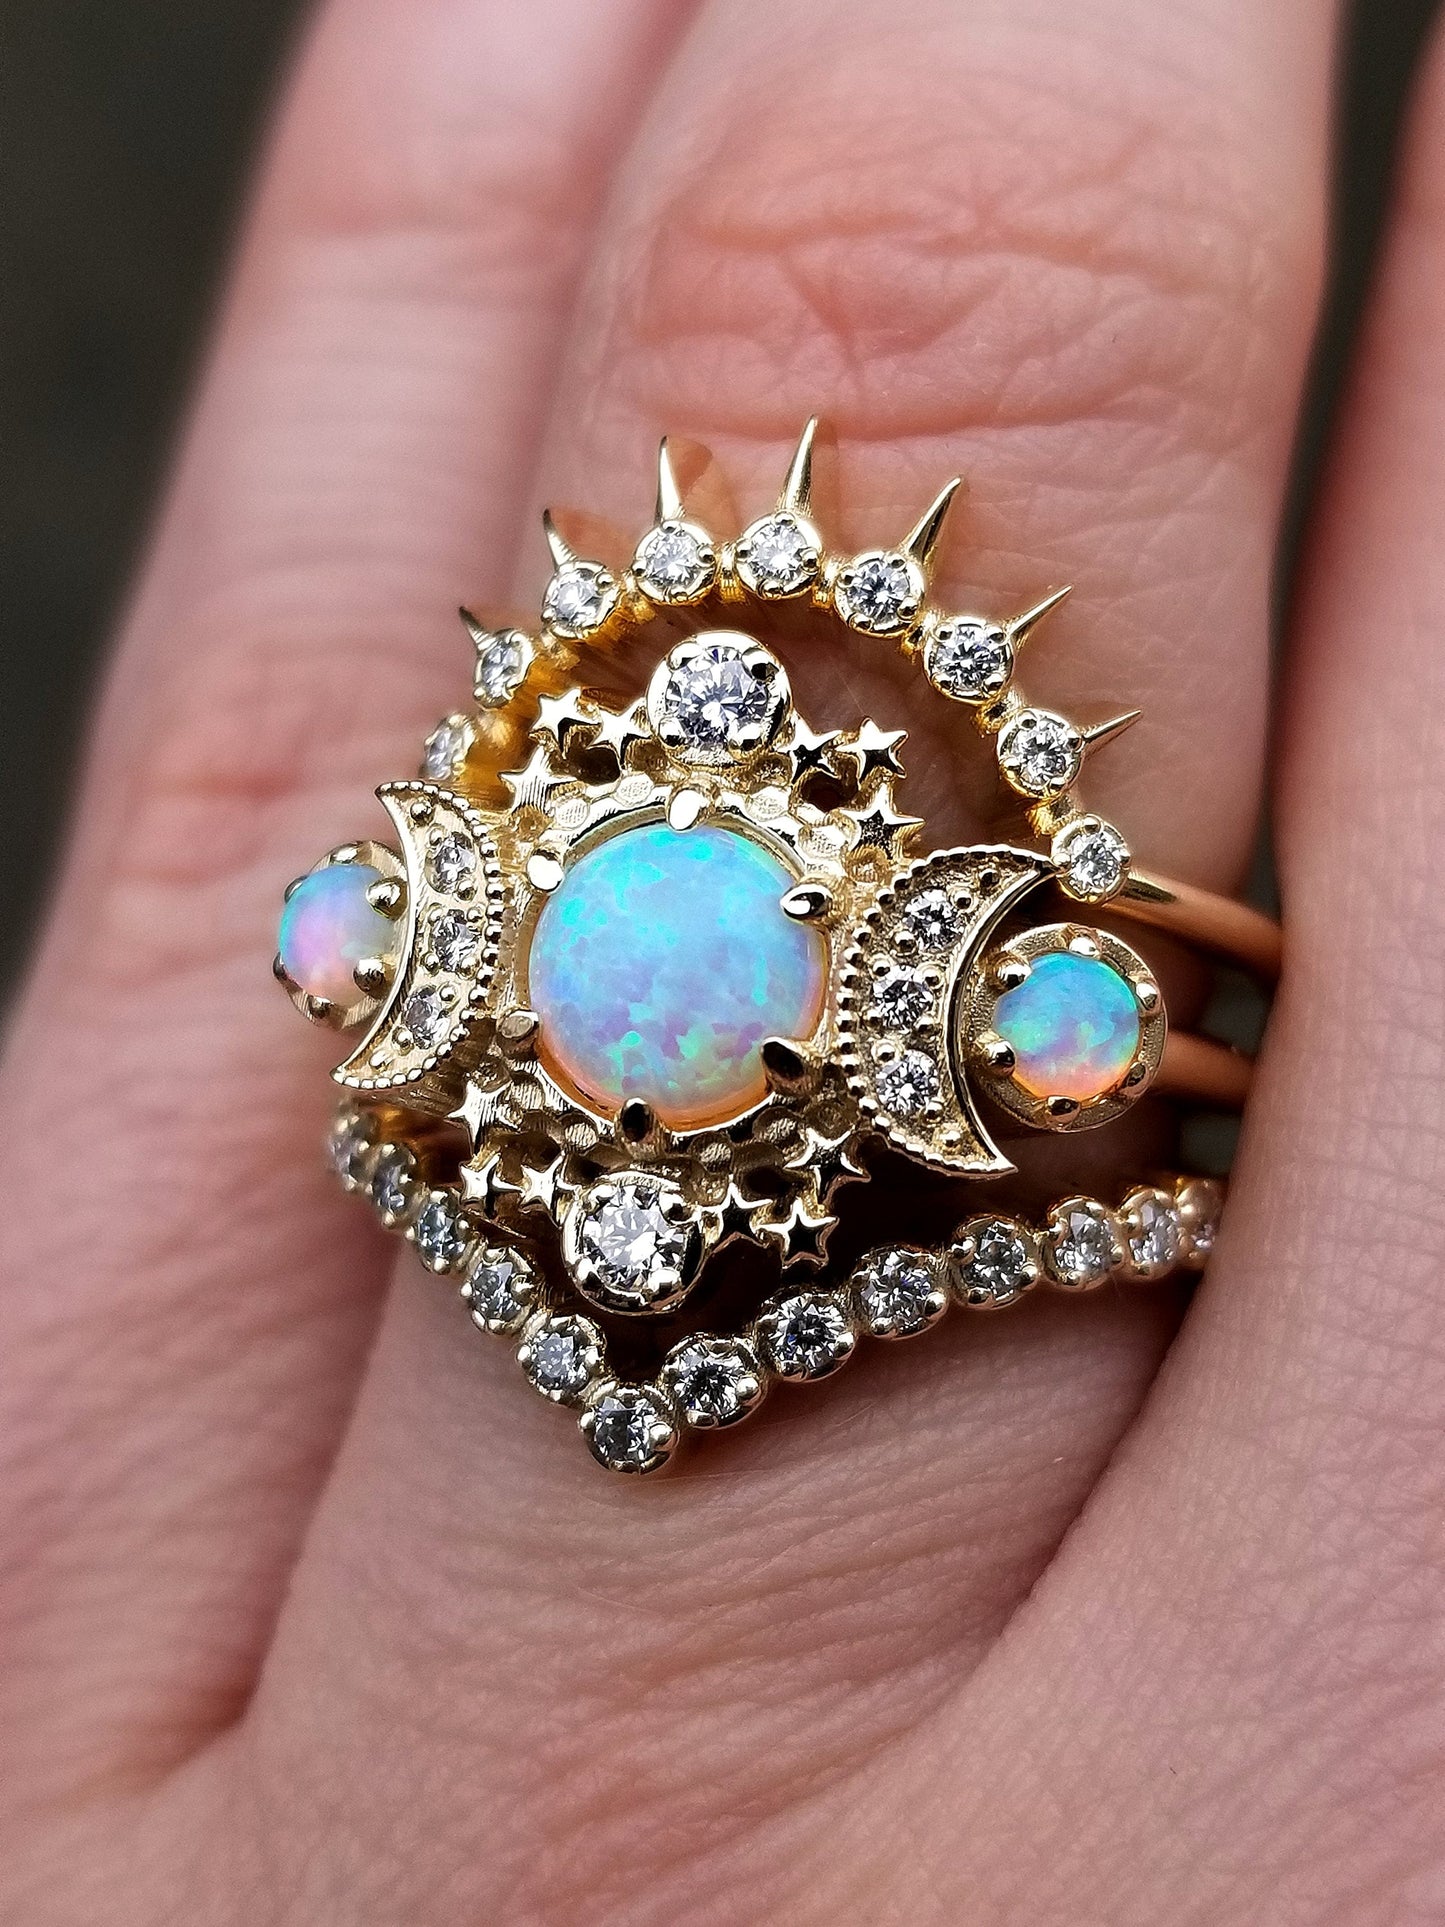 Cosmos Moon Engagement Ring 3 Ring Set with Lab Opals and Diamonds - Boho Celestial Wedding Set